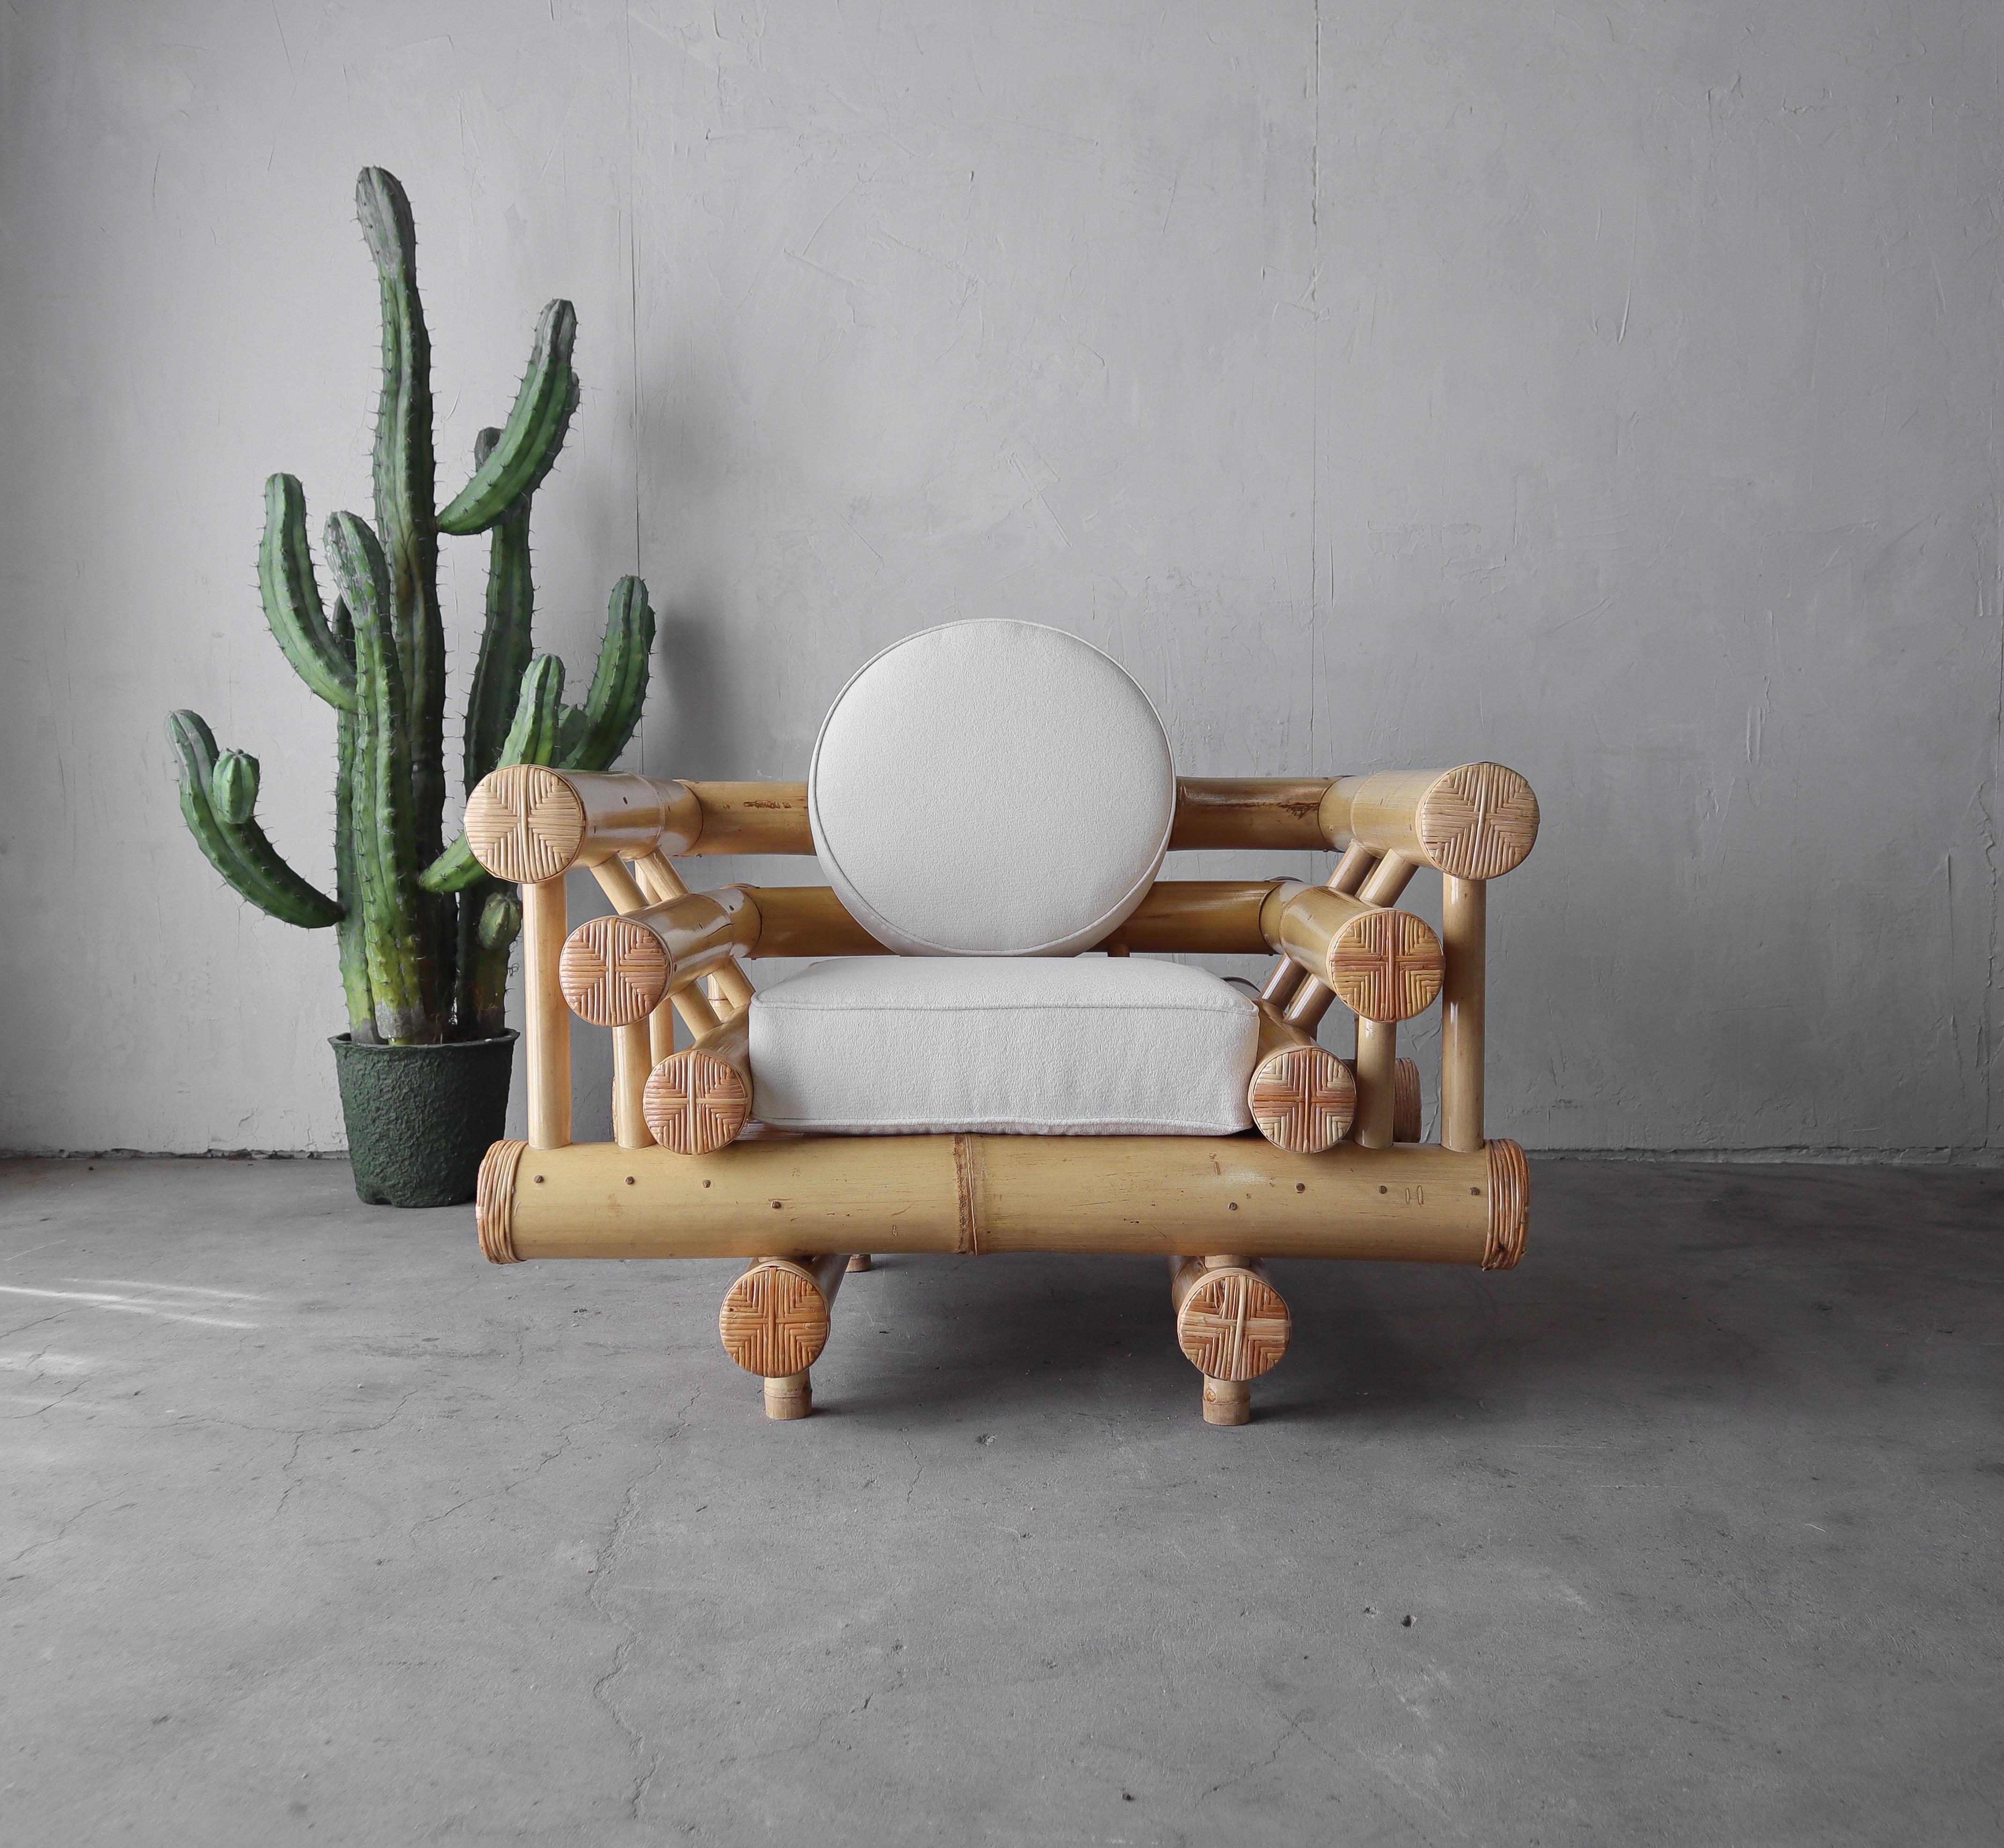 What a unique and special chair. The oversized bamboo really makes this massive vintage lounge chair a super cool and artistic piece. If you have been looking for real statement piece, look no further.

Foam and fabric are all new. The bamboo is